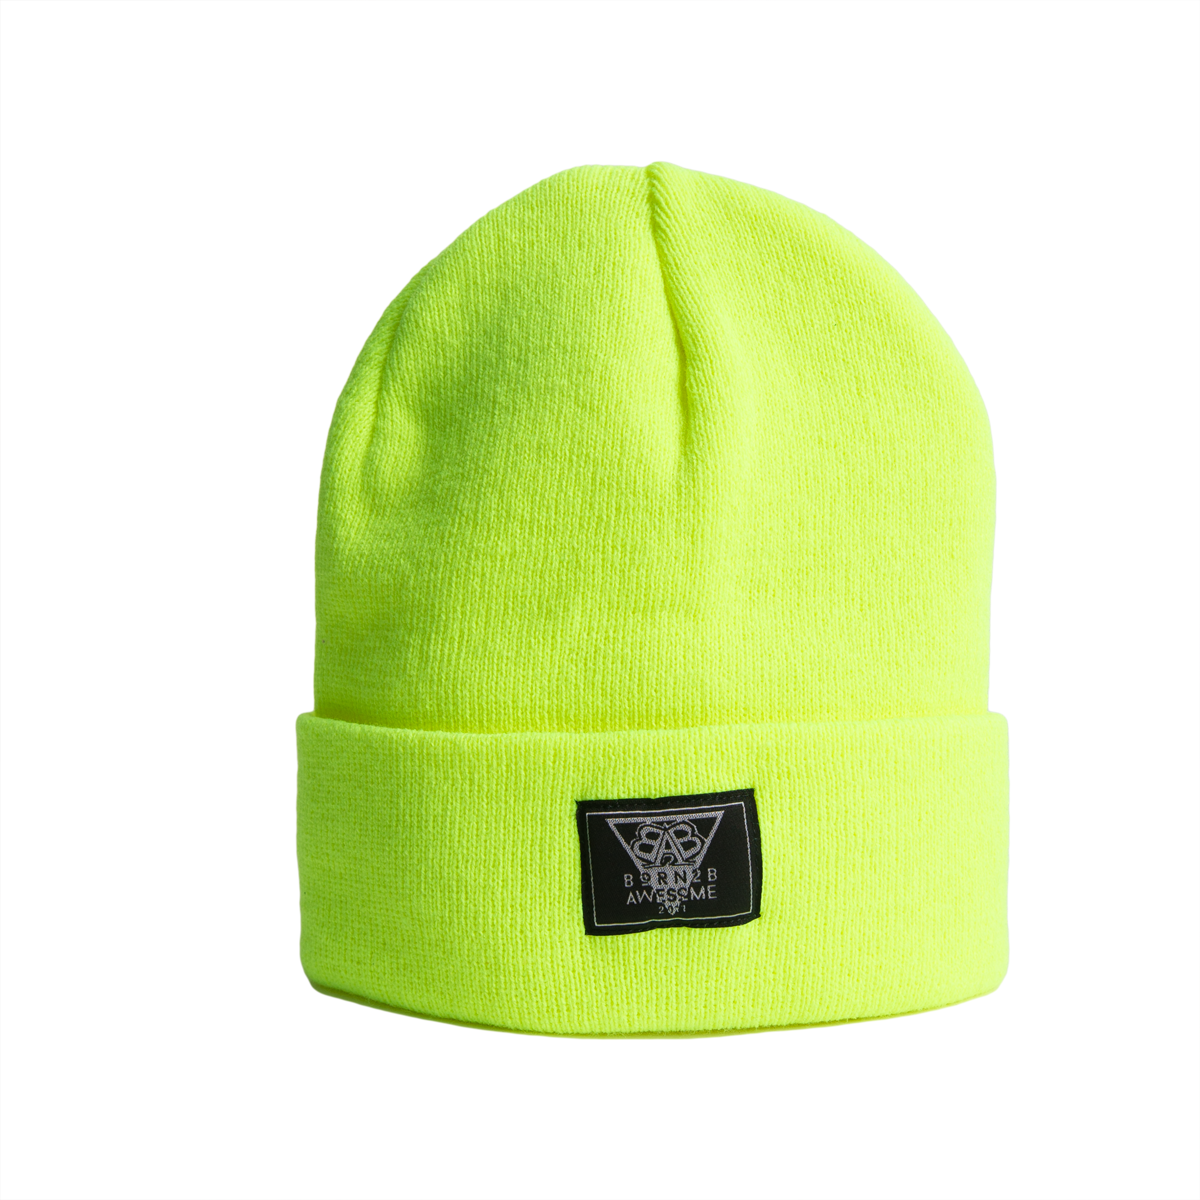 Daily Beanie "Awesome Man" Neon Gelb